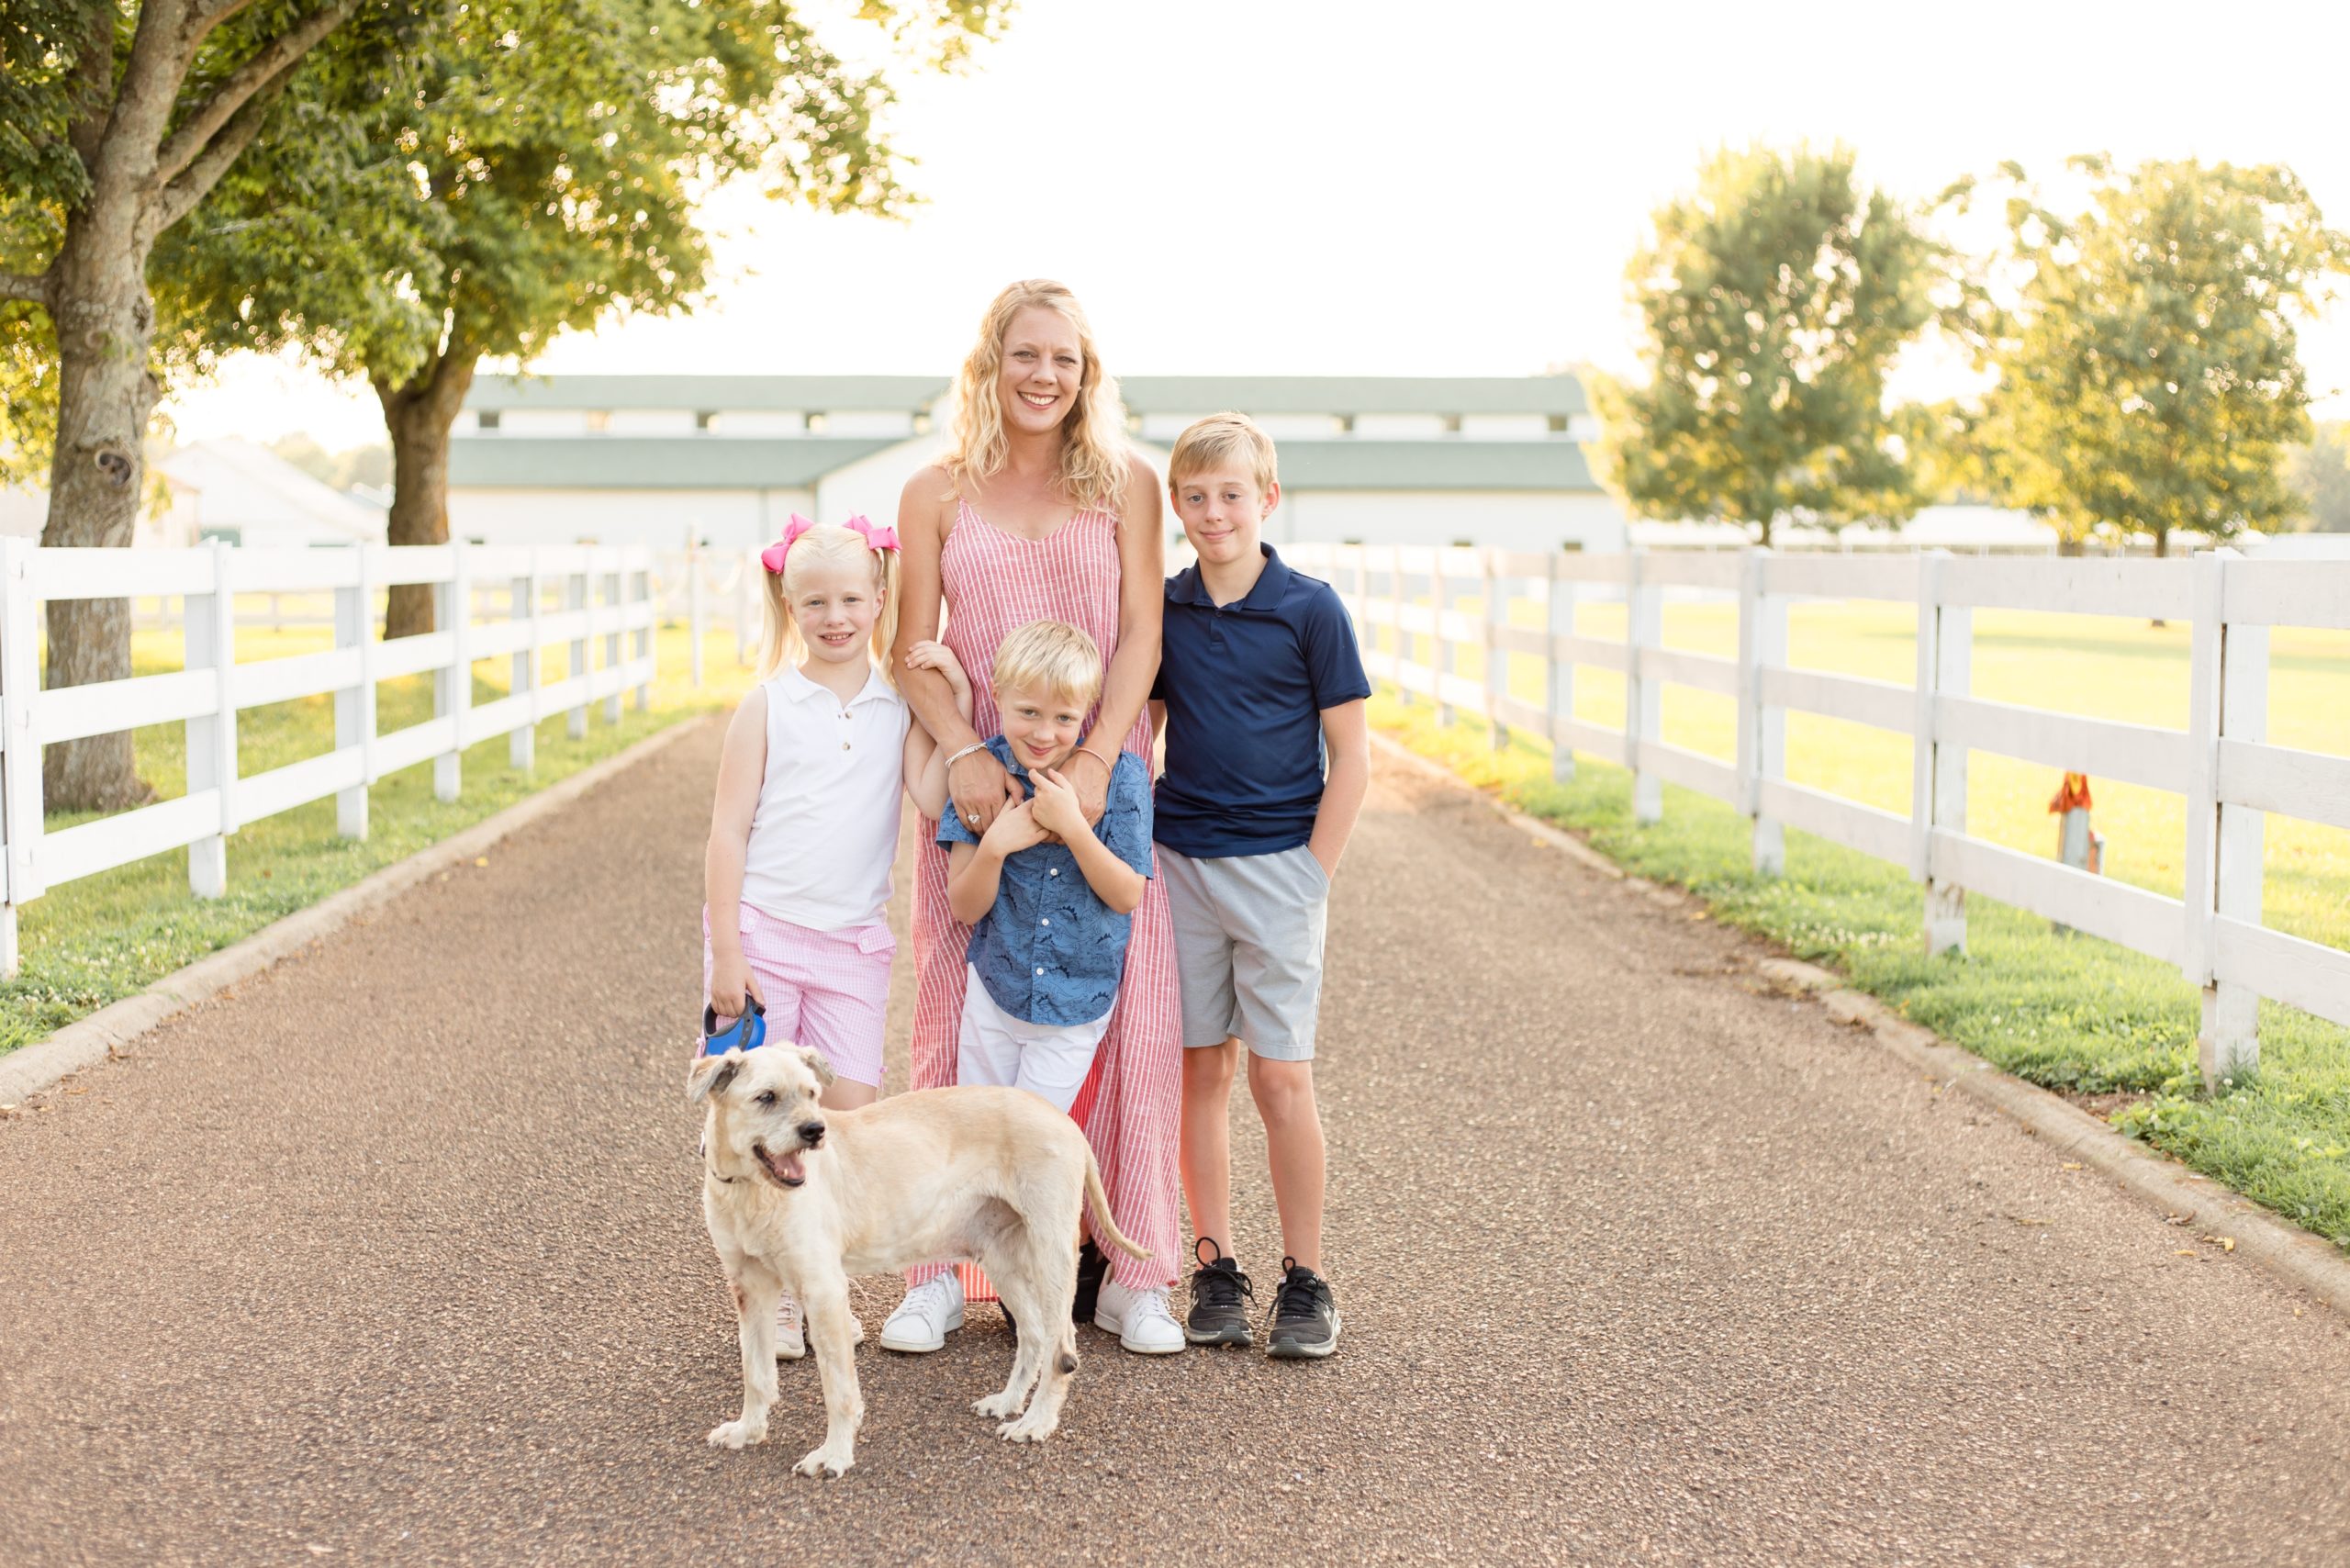 Mom, children and pup pose in front of Harlinsdale Farm in Franklin, TN for mommy and me portrait session with Wisp + Willow Photography Co. Click to see more from this sweet session on our blog now!